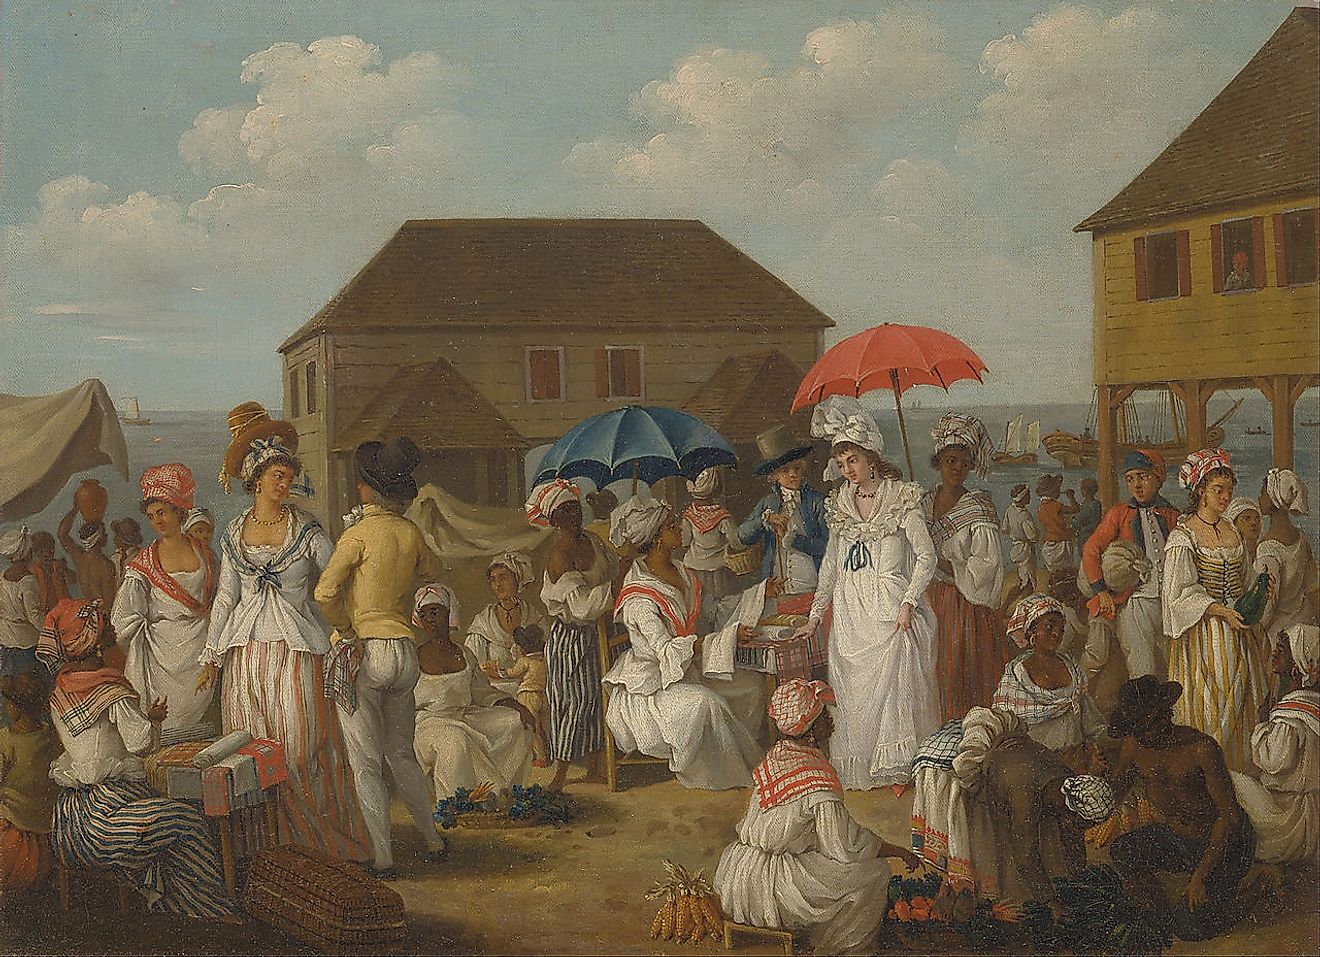 African slaves in a linen market in Dominica. Image credit: Yale Center for British Art/Public domain